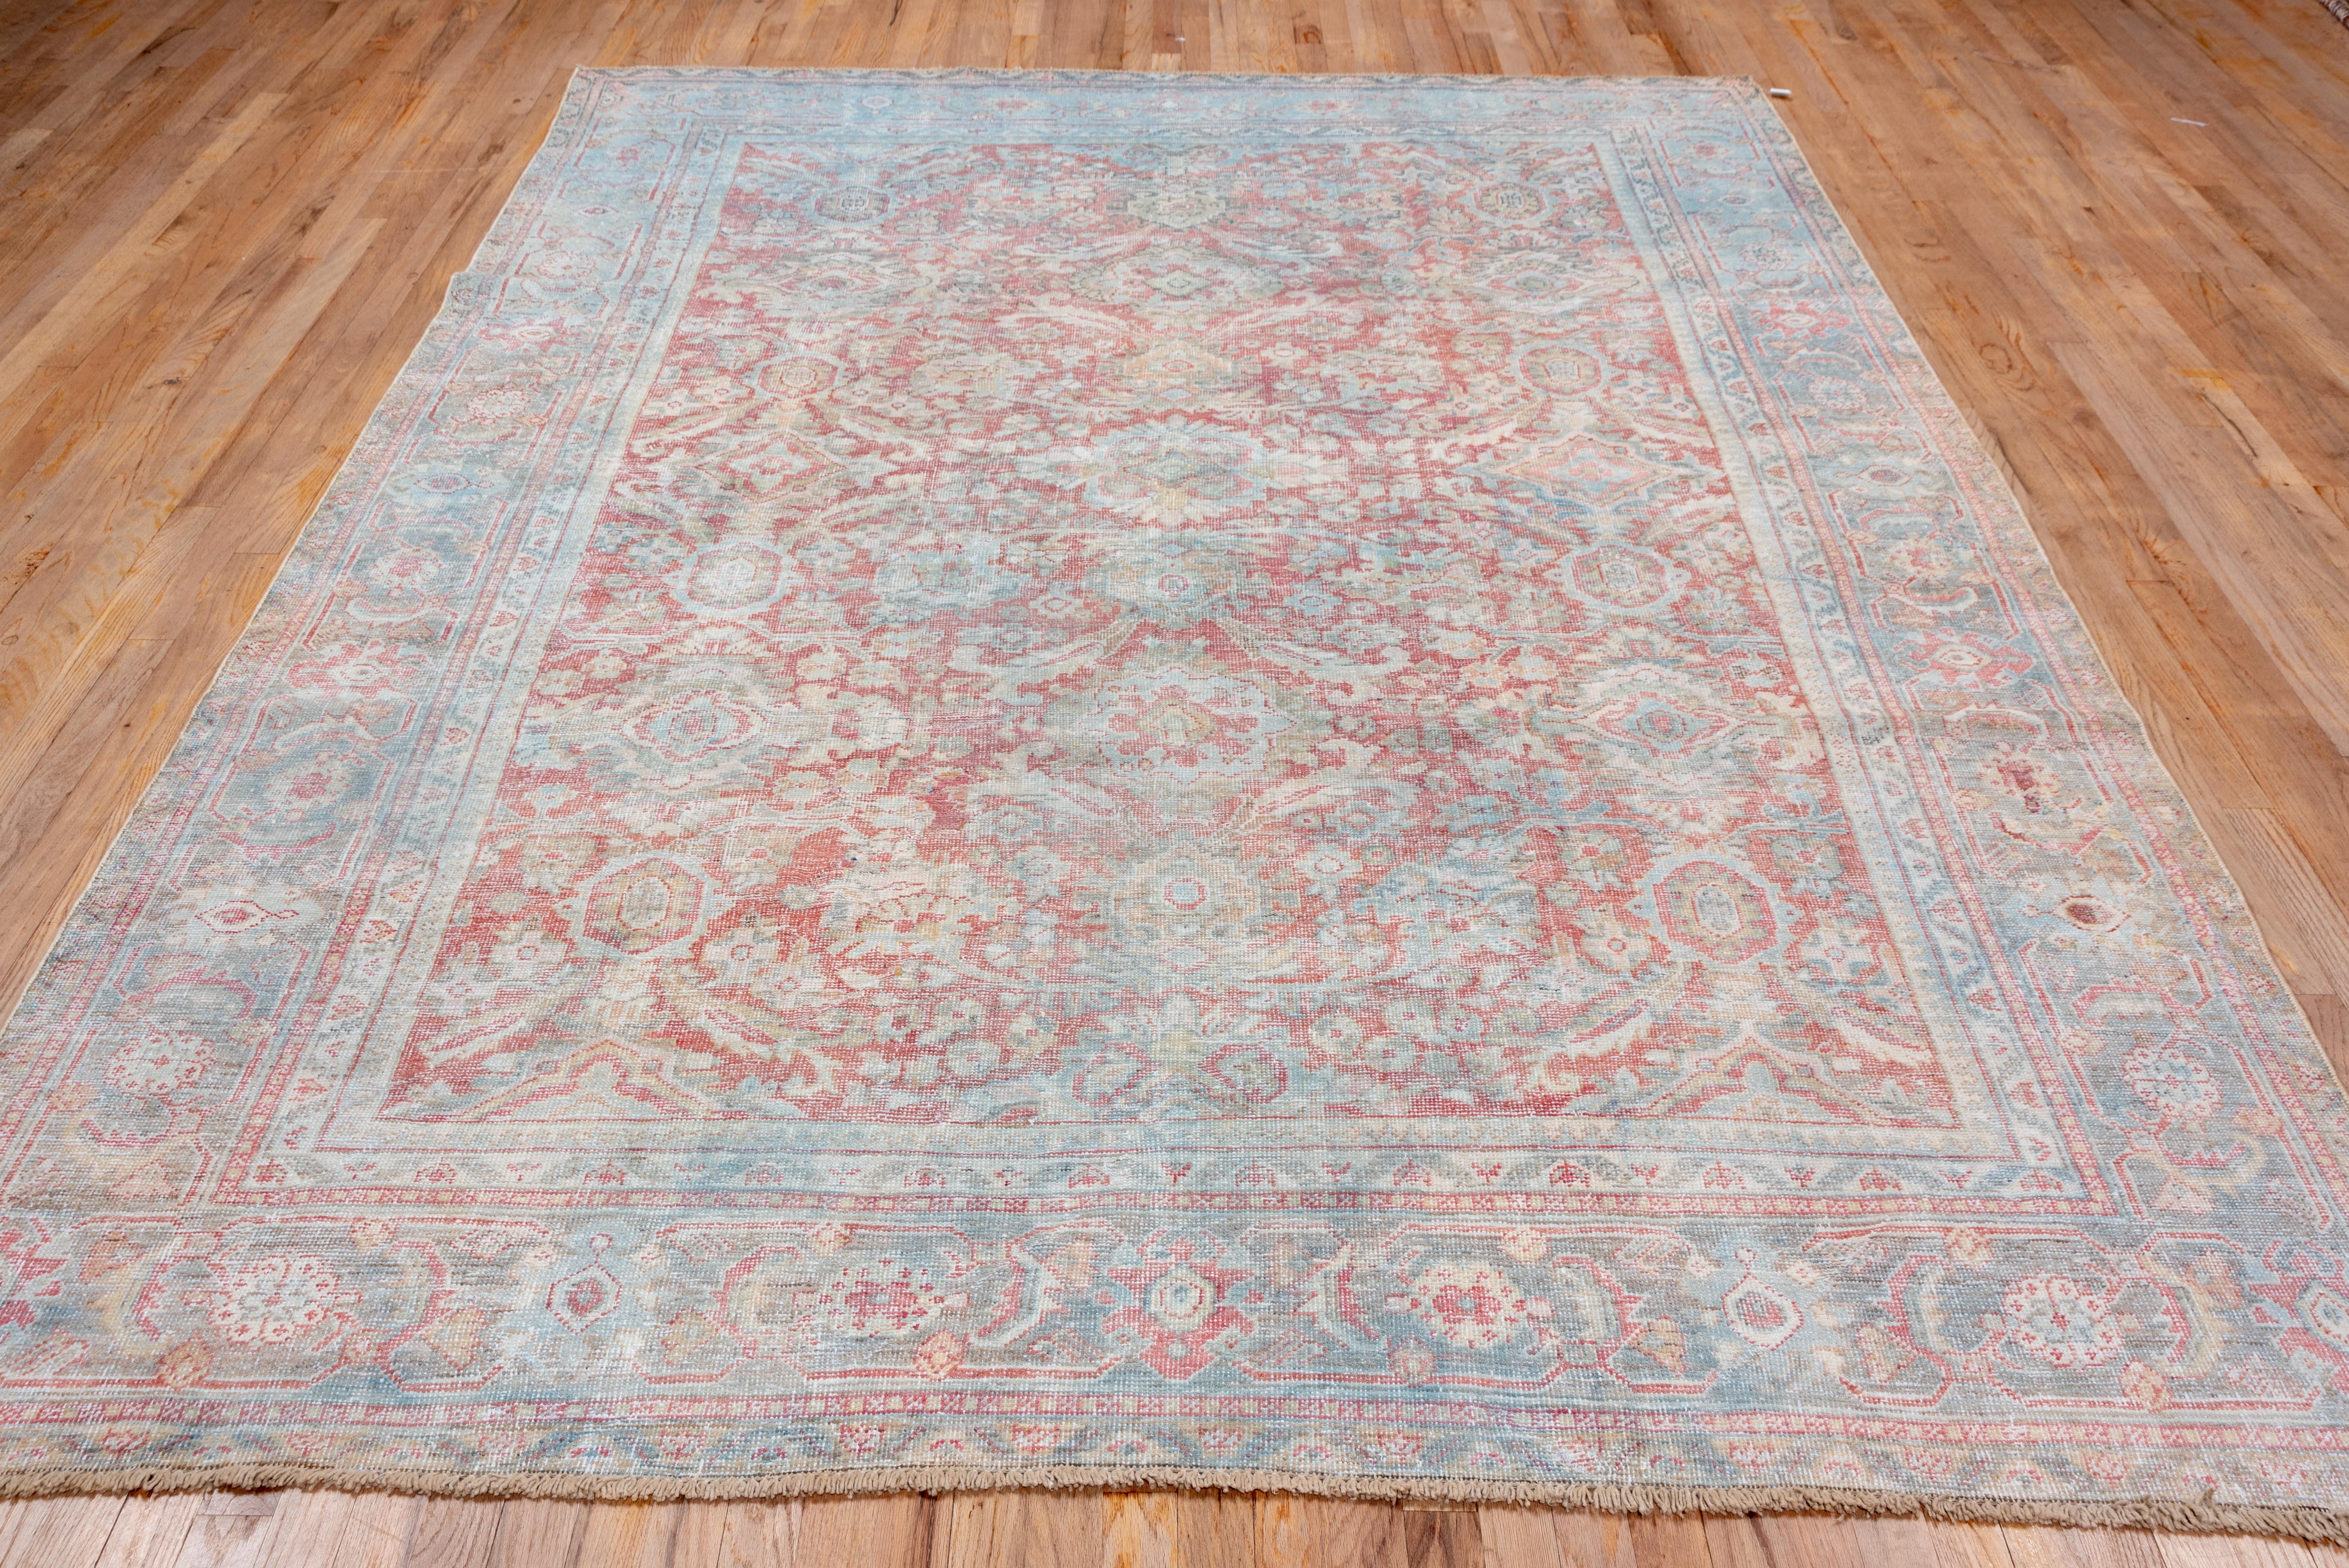 Hand-Knotted Antique Persian Mahal Rug, Lgiht Red Field, Light Blue & Green Borders For Sale